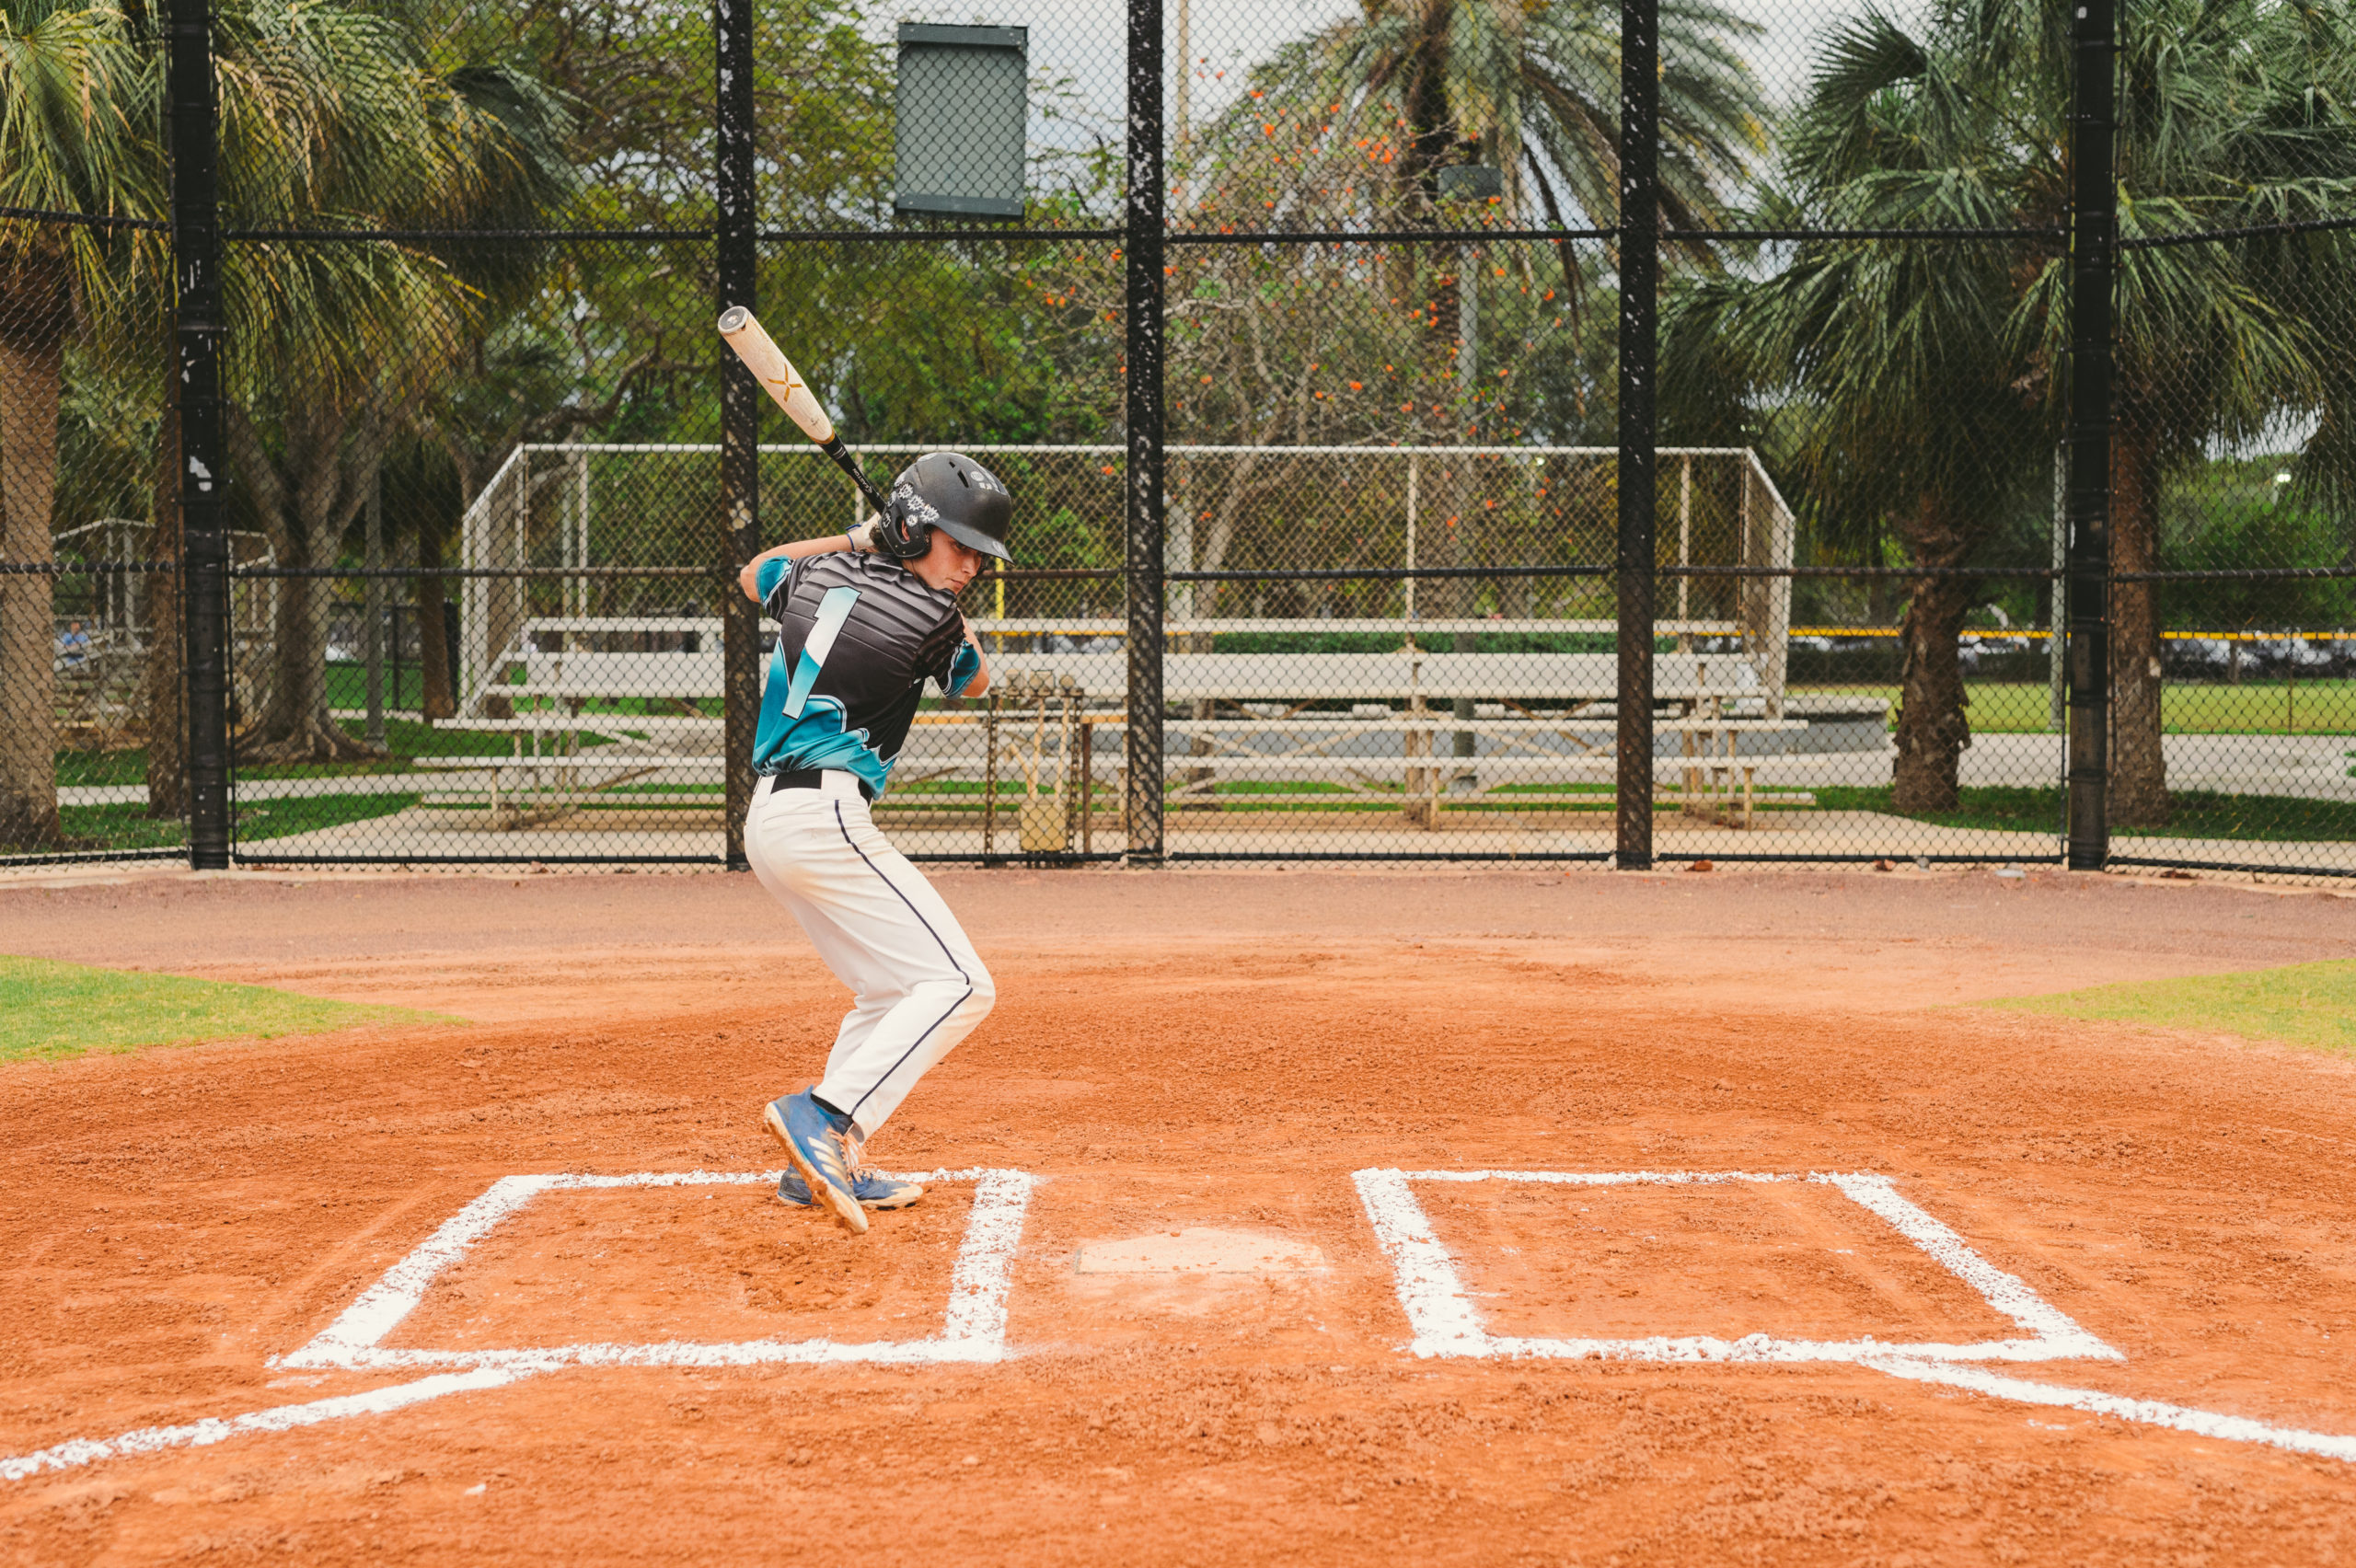 Young baseball player in a batting pose on a baseball field